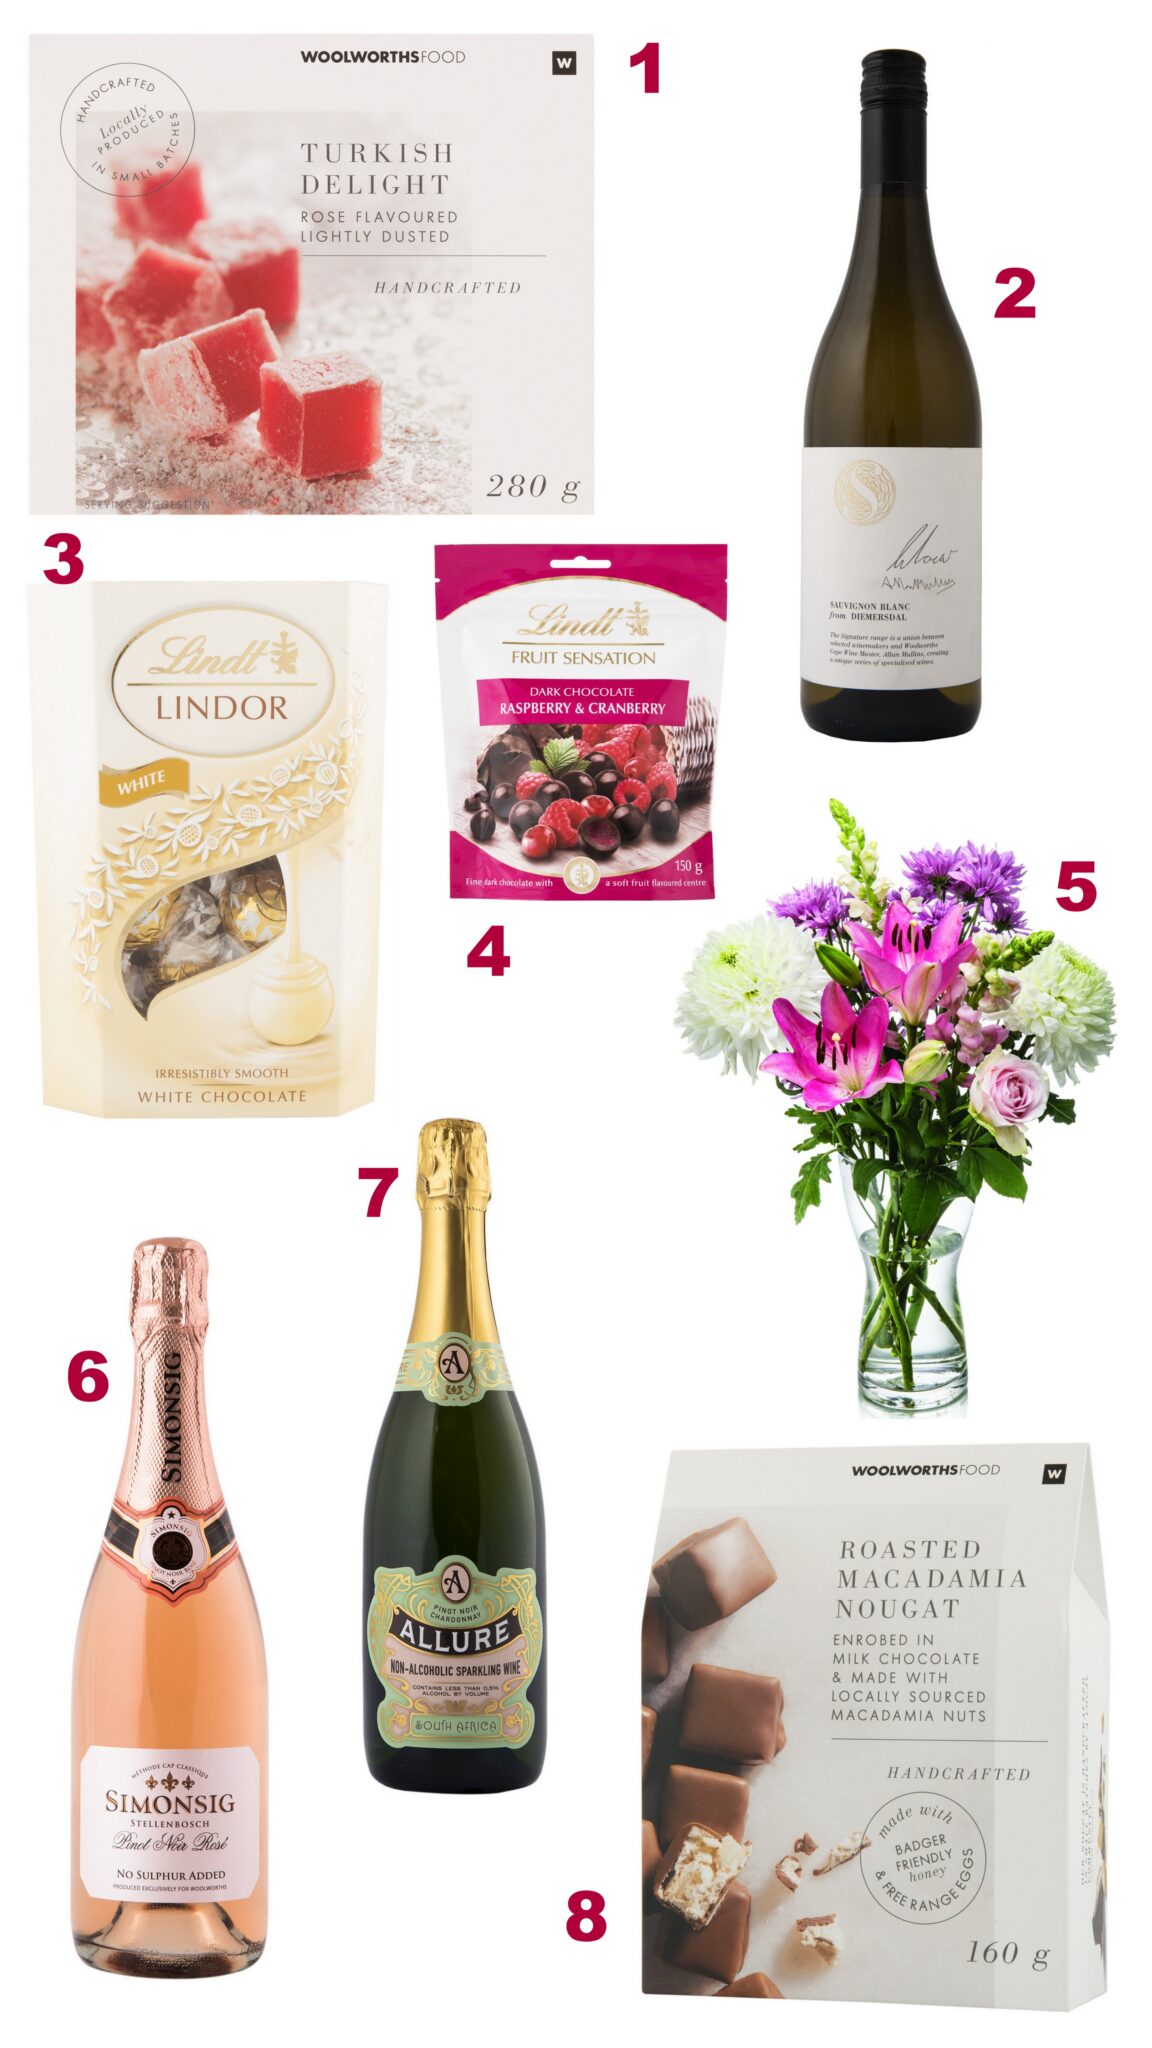 MOTHER'S DAY GIFT GUIDE - FOOD